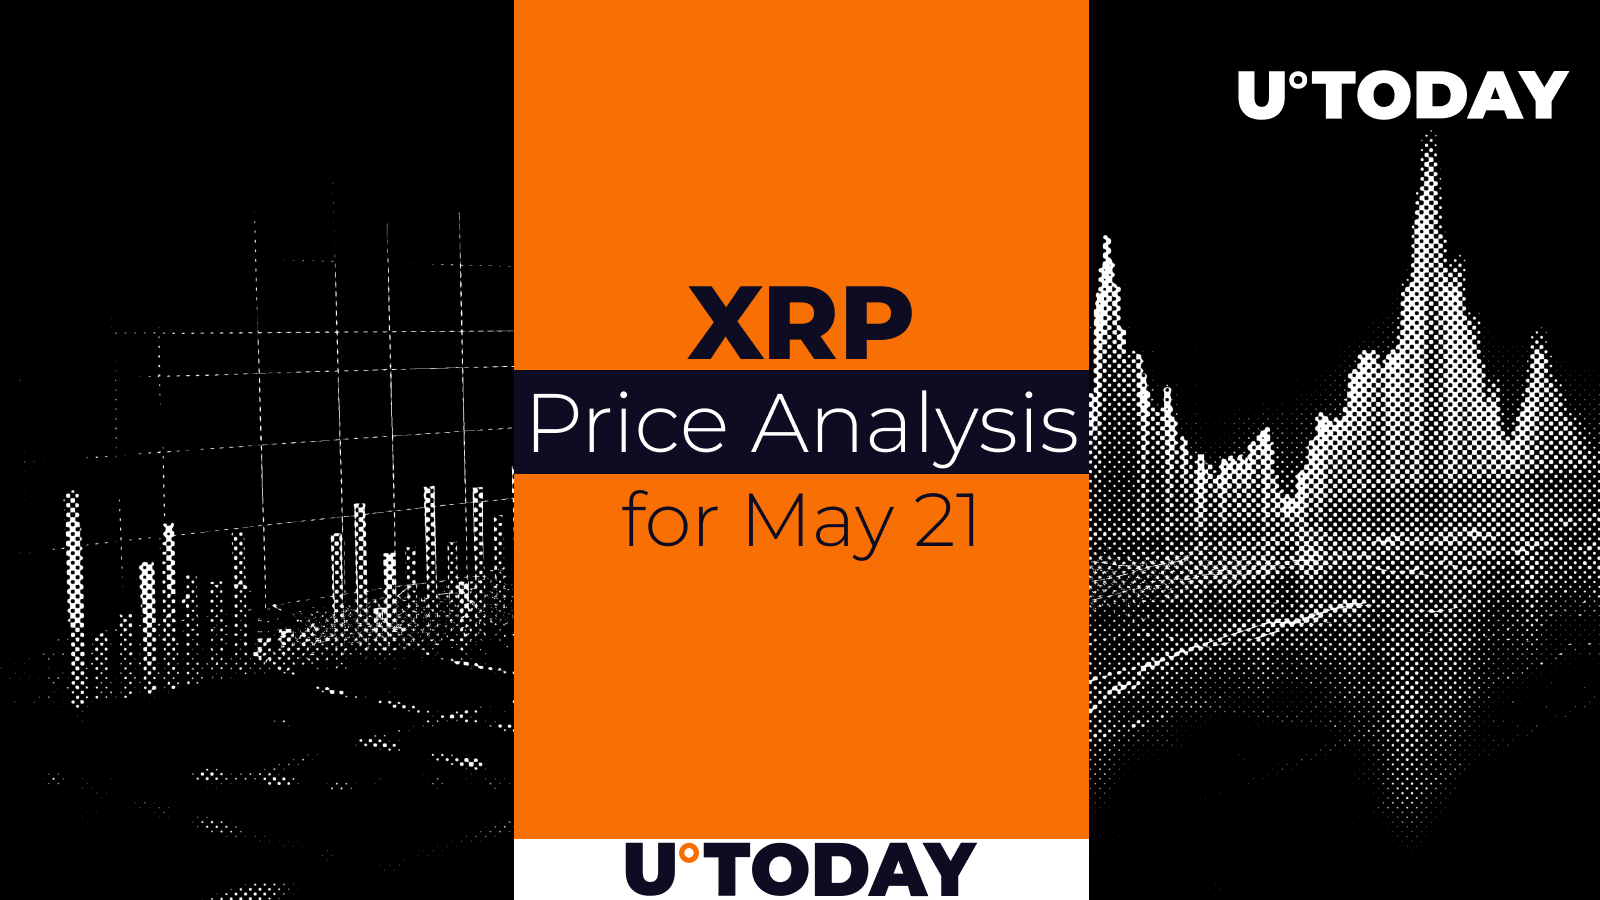 XRP Price Prediction for May 21